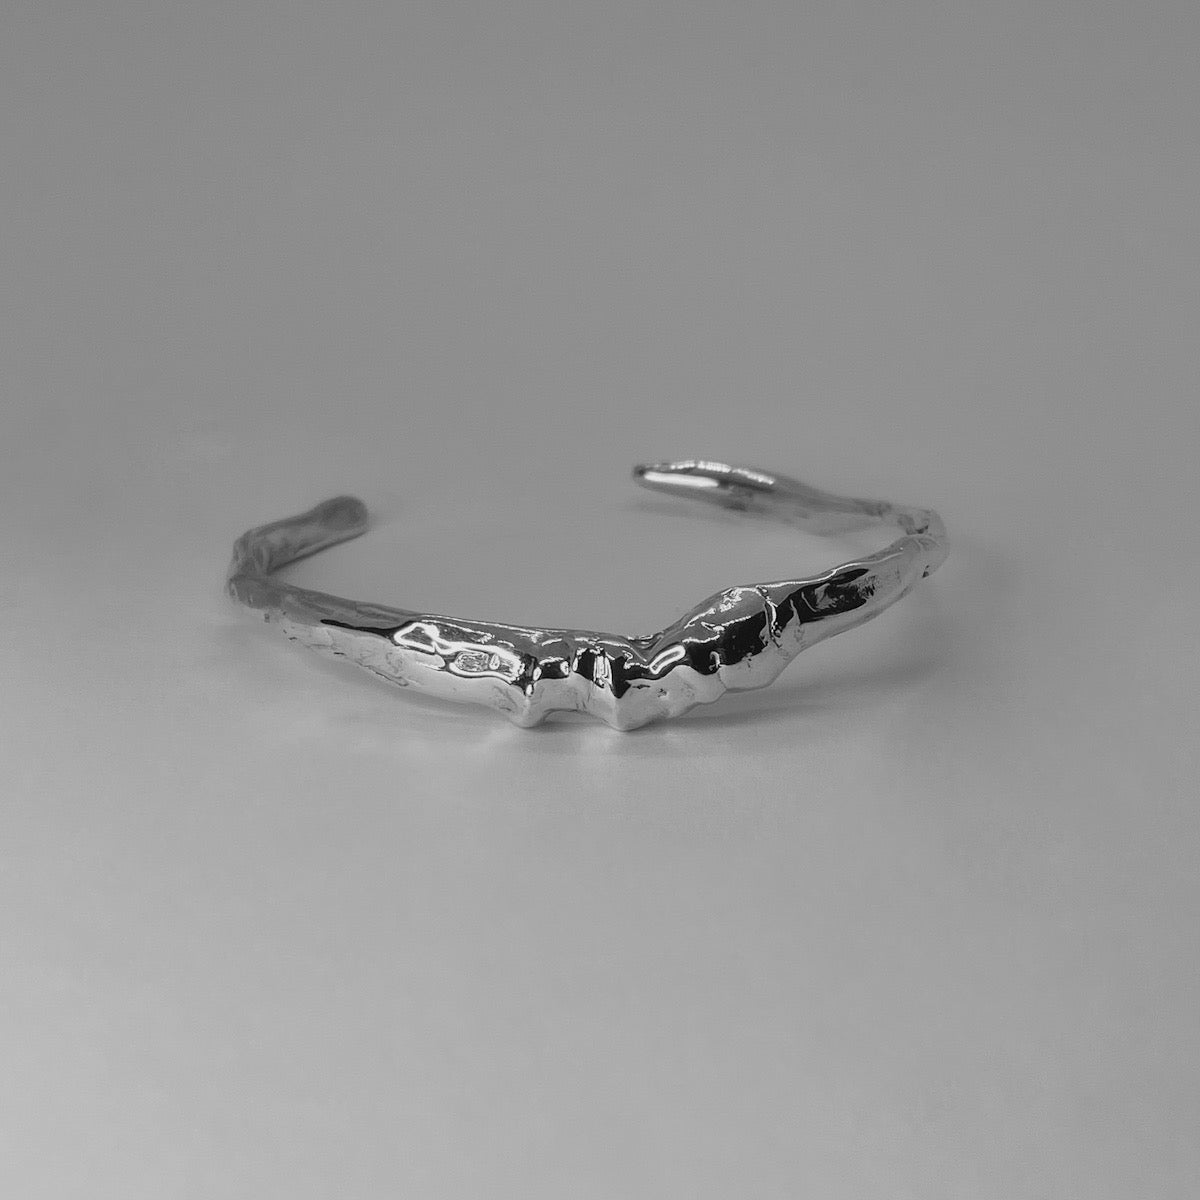 Handcrafted minimalistic bracelet with a raw texture, made from sterling silver 925